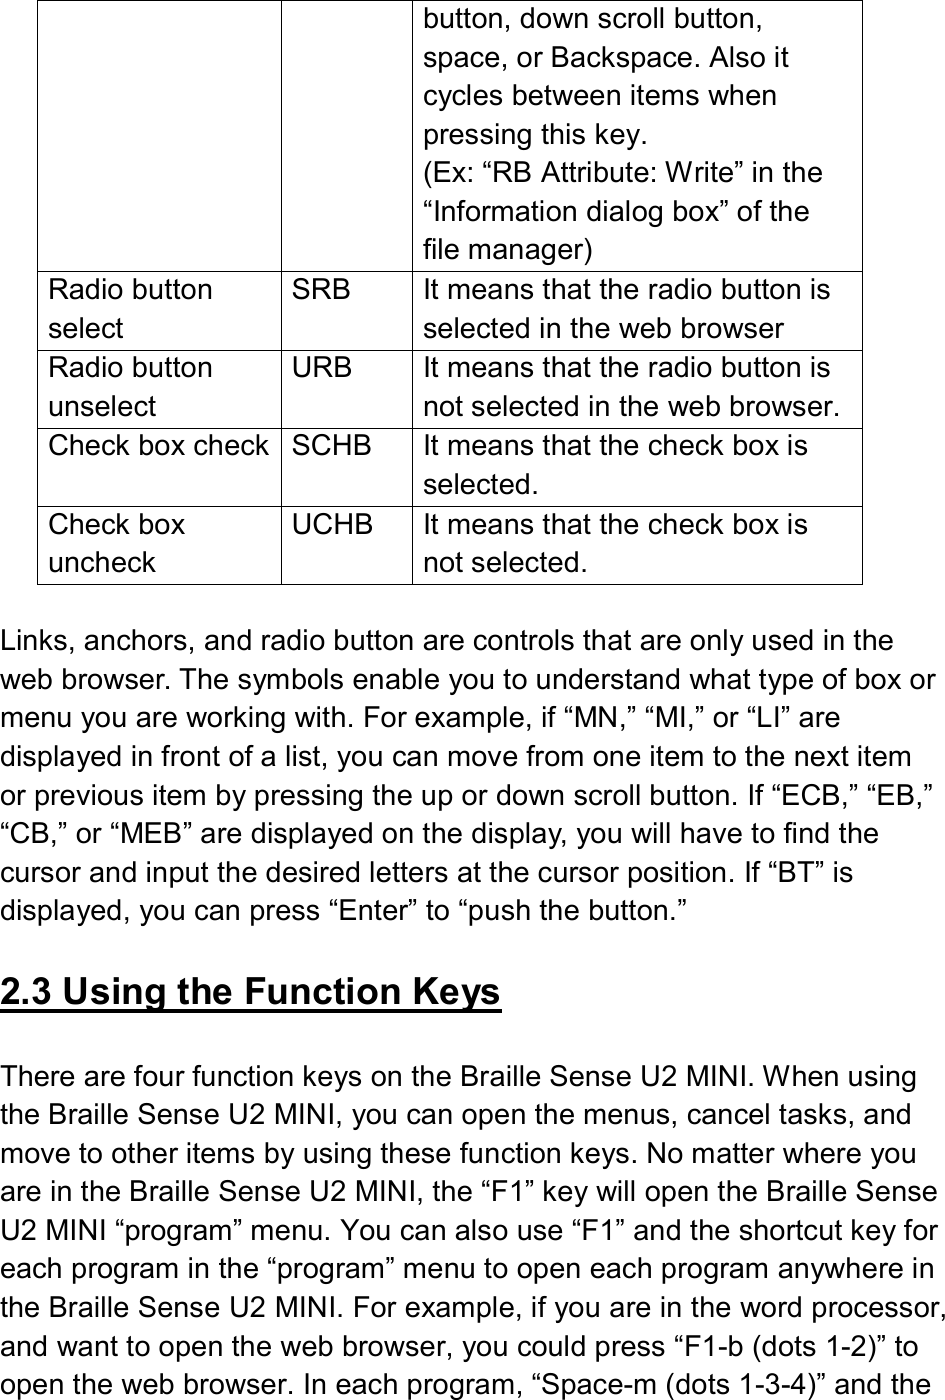  button, down scroll button, space, or Backspace. Also it cycles between items when pressing this key. (Ex: “RB Attribute: Write” in the “Information dialog box” of the file manager) Radio button select SRB  It means that the radio button is selected in the web browser Radio button unselect URB  It means that the radio button is not selected in the web browser. Check box check SCHB  It means that the check box is selected. Check box uncheck UCHB  It means that the check box is not selected.    Links, anchors, and radio button are controls that are only used in the web browser. The symbols enable you to understand what type of box or menu you are working with. For example, if “MN,” “MI,” or “LI” are displayed in front of a list, you can move from one item to the next item or previous item by pressing the up or down scroll button. If “ECB,” “EB,” “CB,” or “MEB” are displayed on the display, you will have to find the cursor and input the desired letters at the cursor position. If “BT” is displayed, you can press “Enter” to “push the button.”  2.3 Using the Function Keys  There are four function keys on the Braille Sense U2 MINI. When using the Braille Sense U2 MINI, you can open the menus, cancel tasks, and move to other items by using these function keys. No matter where you are in the Braille Sense U2 MINI, the “F1” key will open the Braille Sense U2 MINI “program” menu. You can also use “F1” and the shortcut key for each program in the “program” menu to open each program anywhere in the Braille Sense U2 MINI. For example, if you are in the word processor, and want to open the web browser, you could press “F1-b (dots 1-2)” to open the web browser. In each program, “Space-m (dots 1-3-4)” and the 